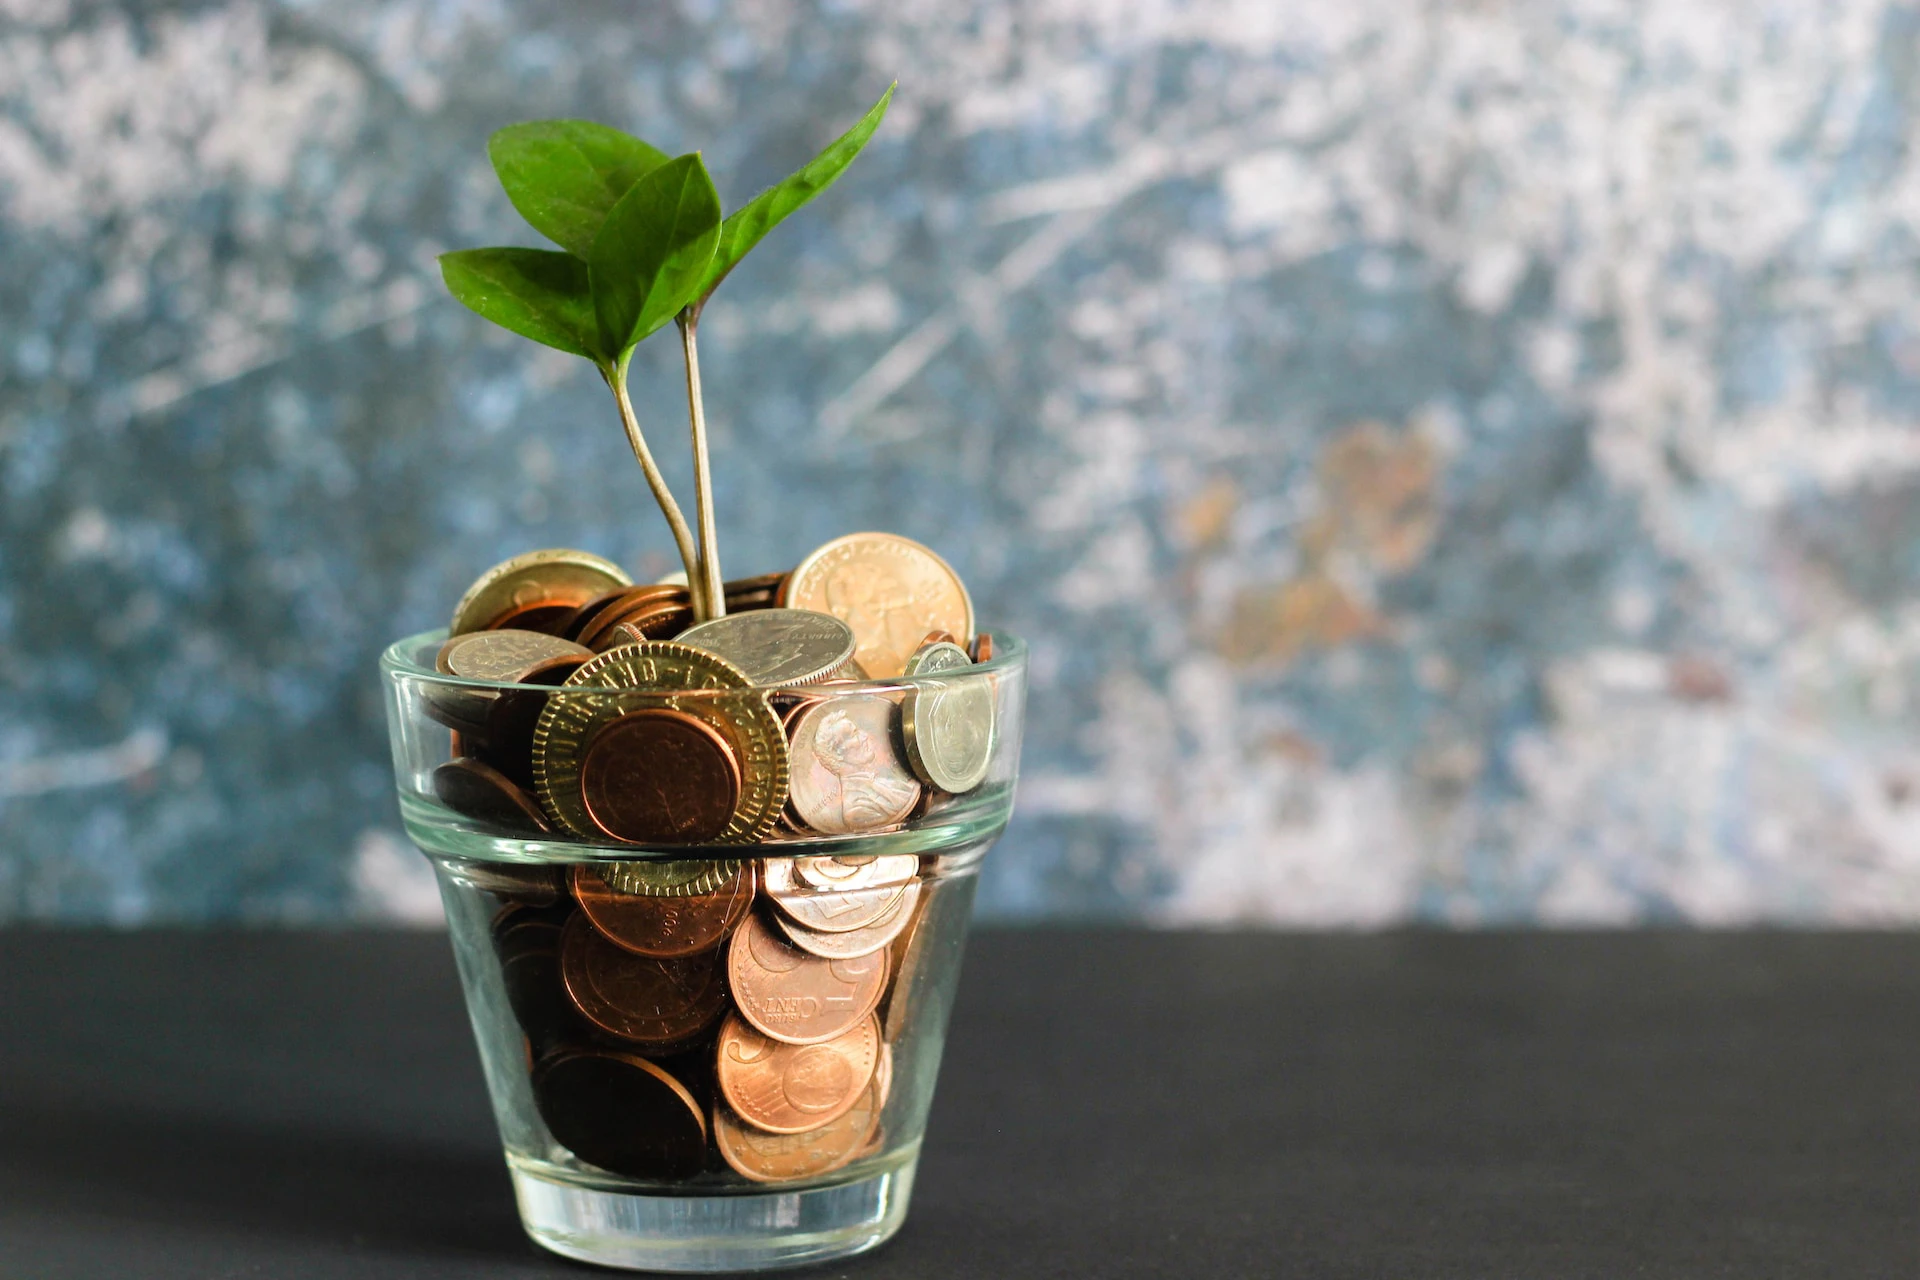 plant growing out of a jar of coins